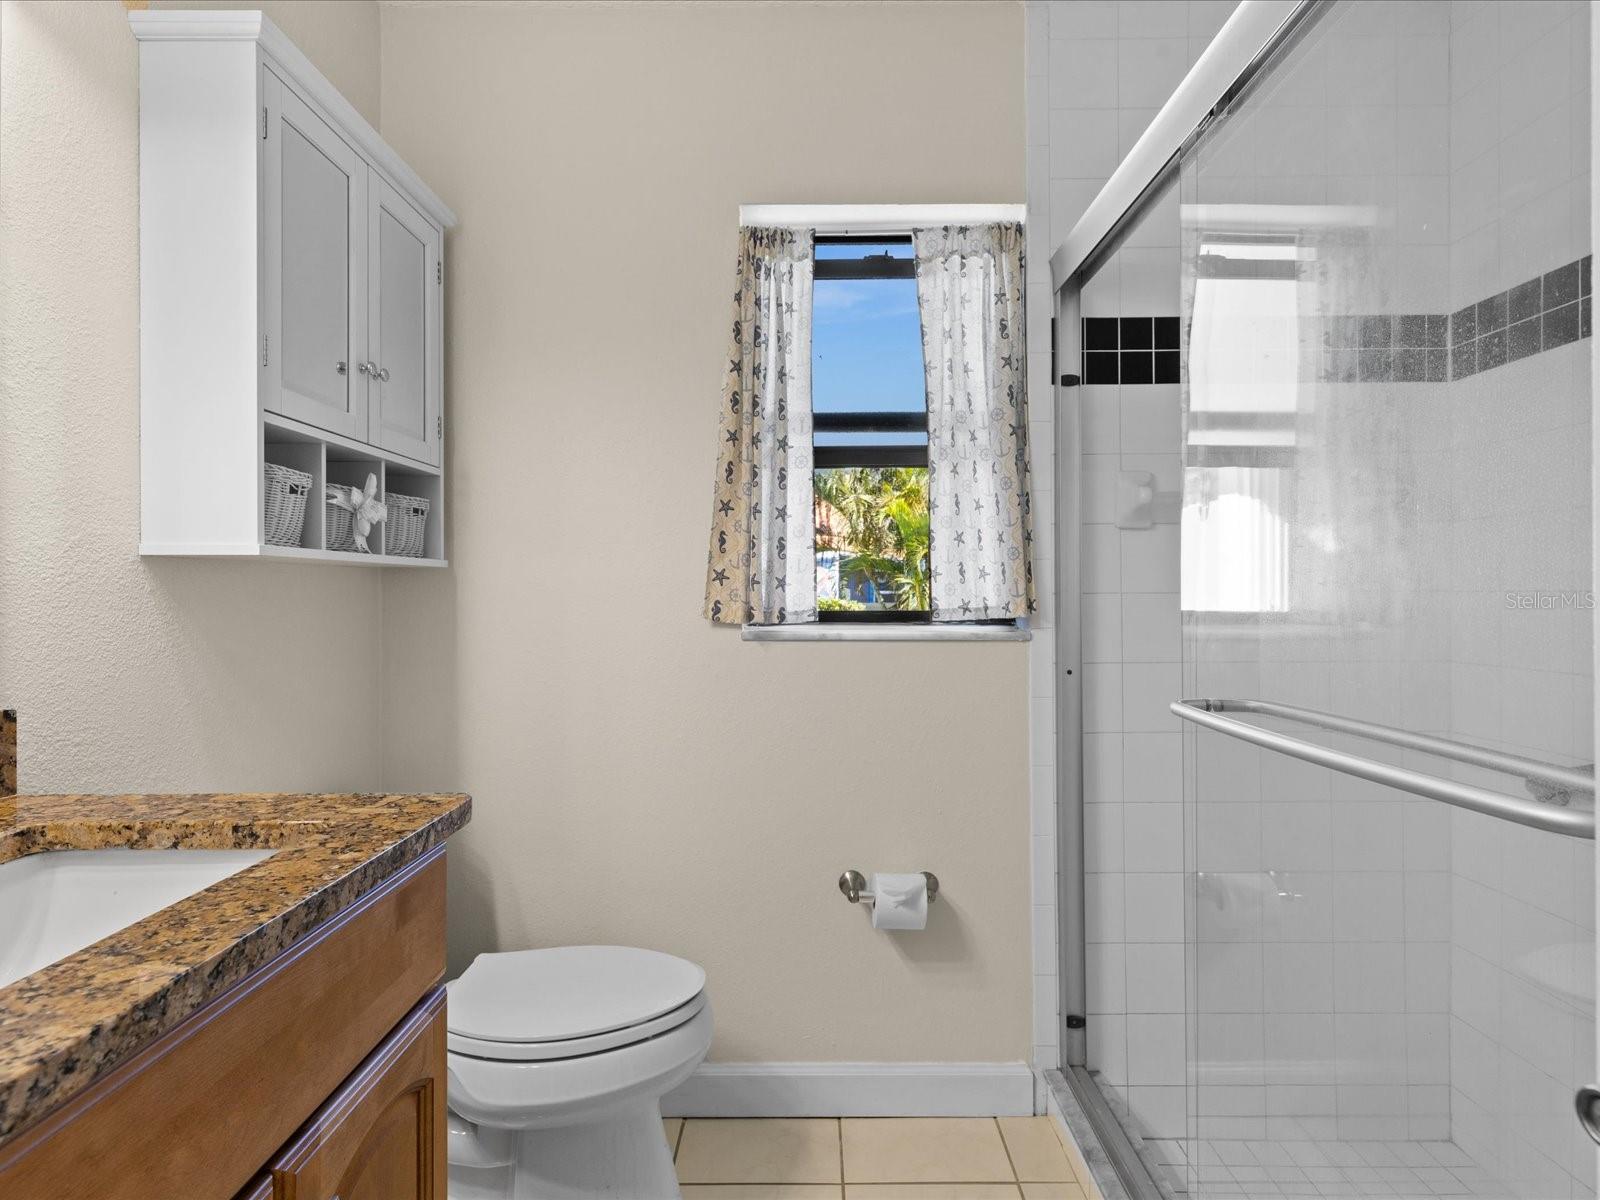 Primary bathroom/ In law suite